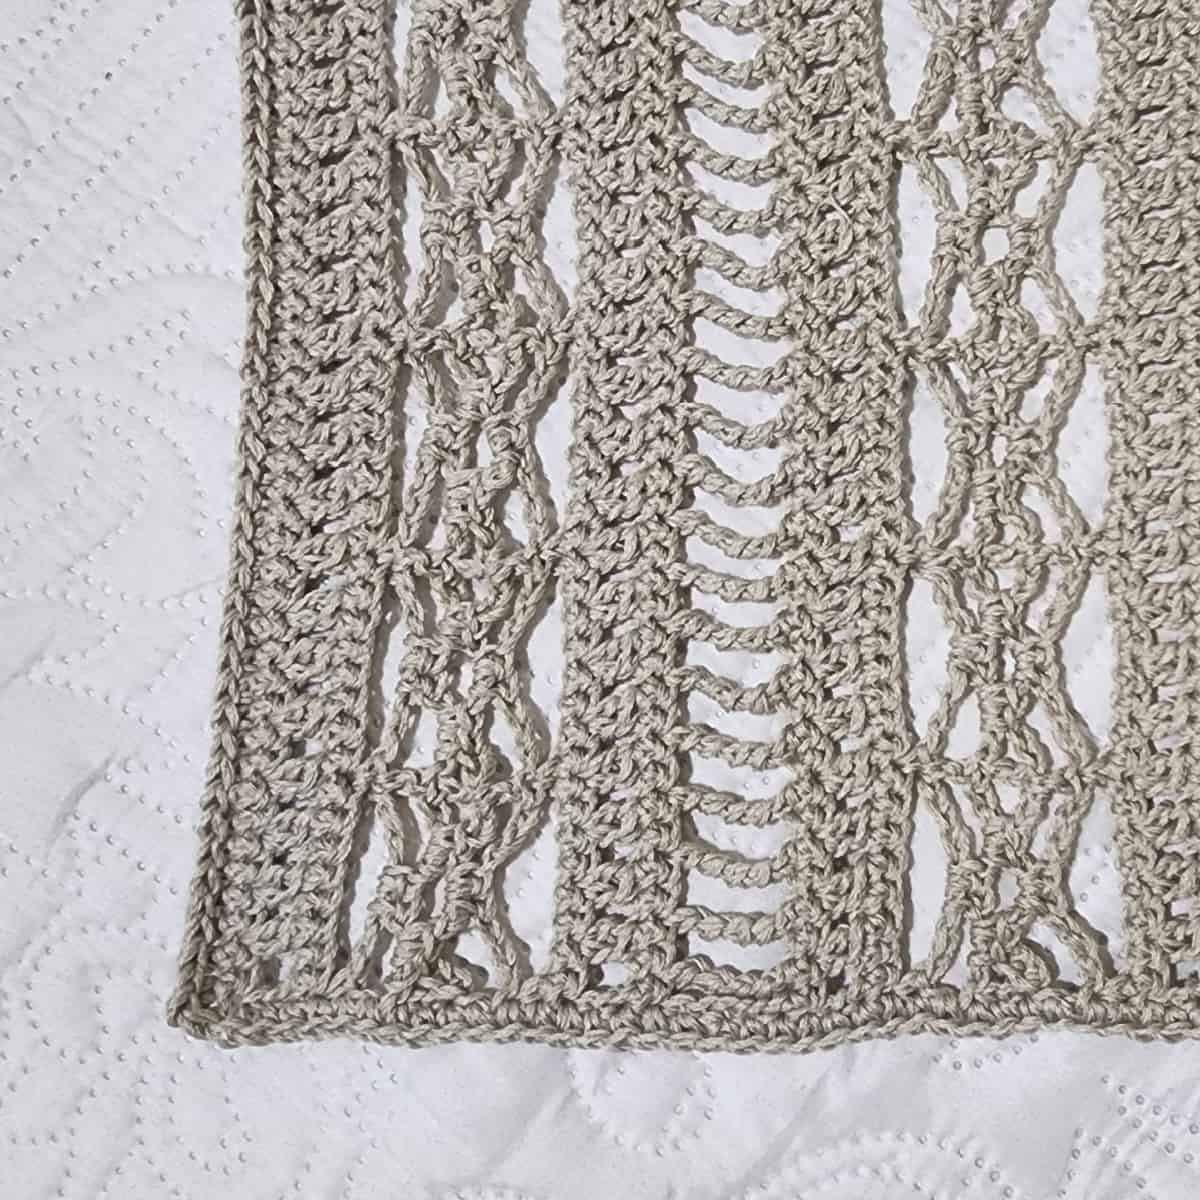 Close up of lace pattern on crochet swimsuit cover up.